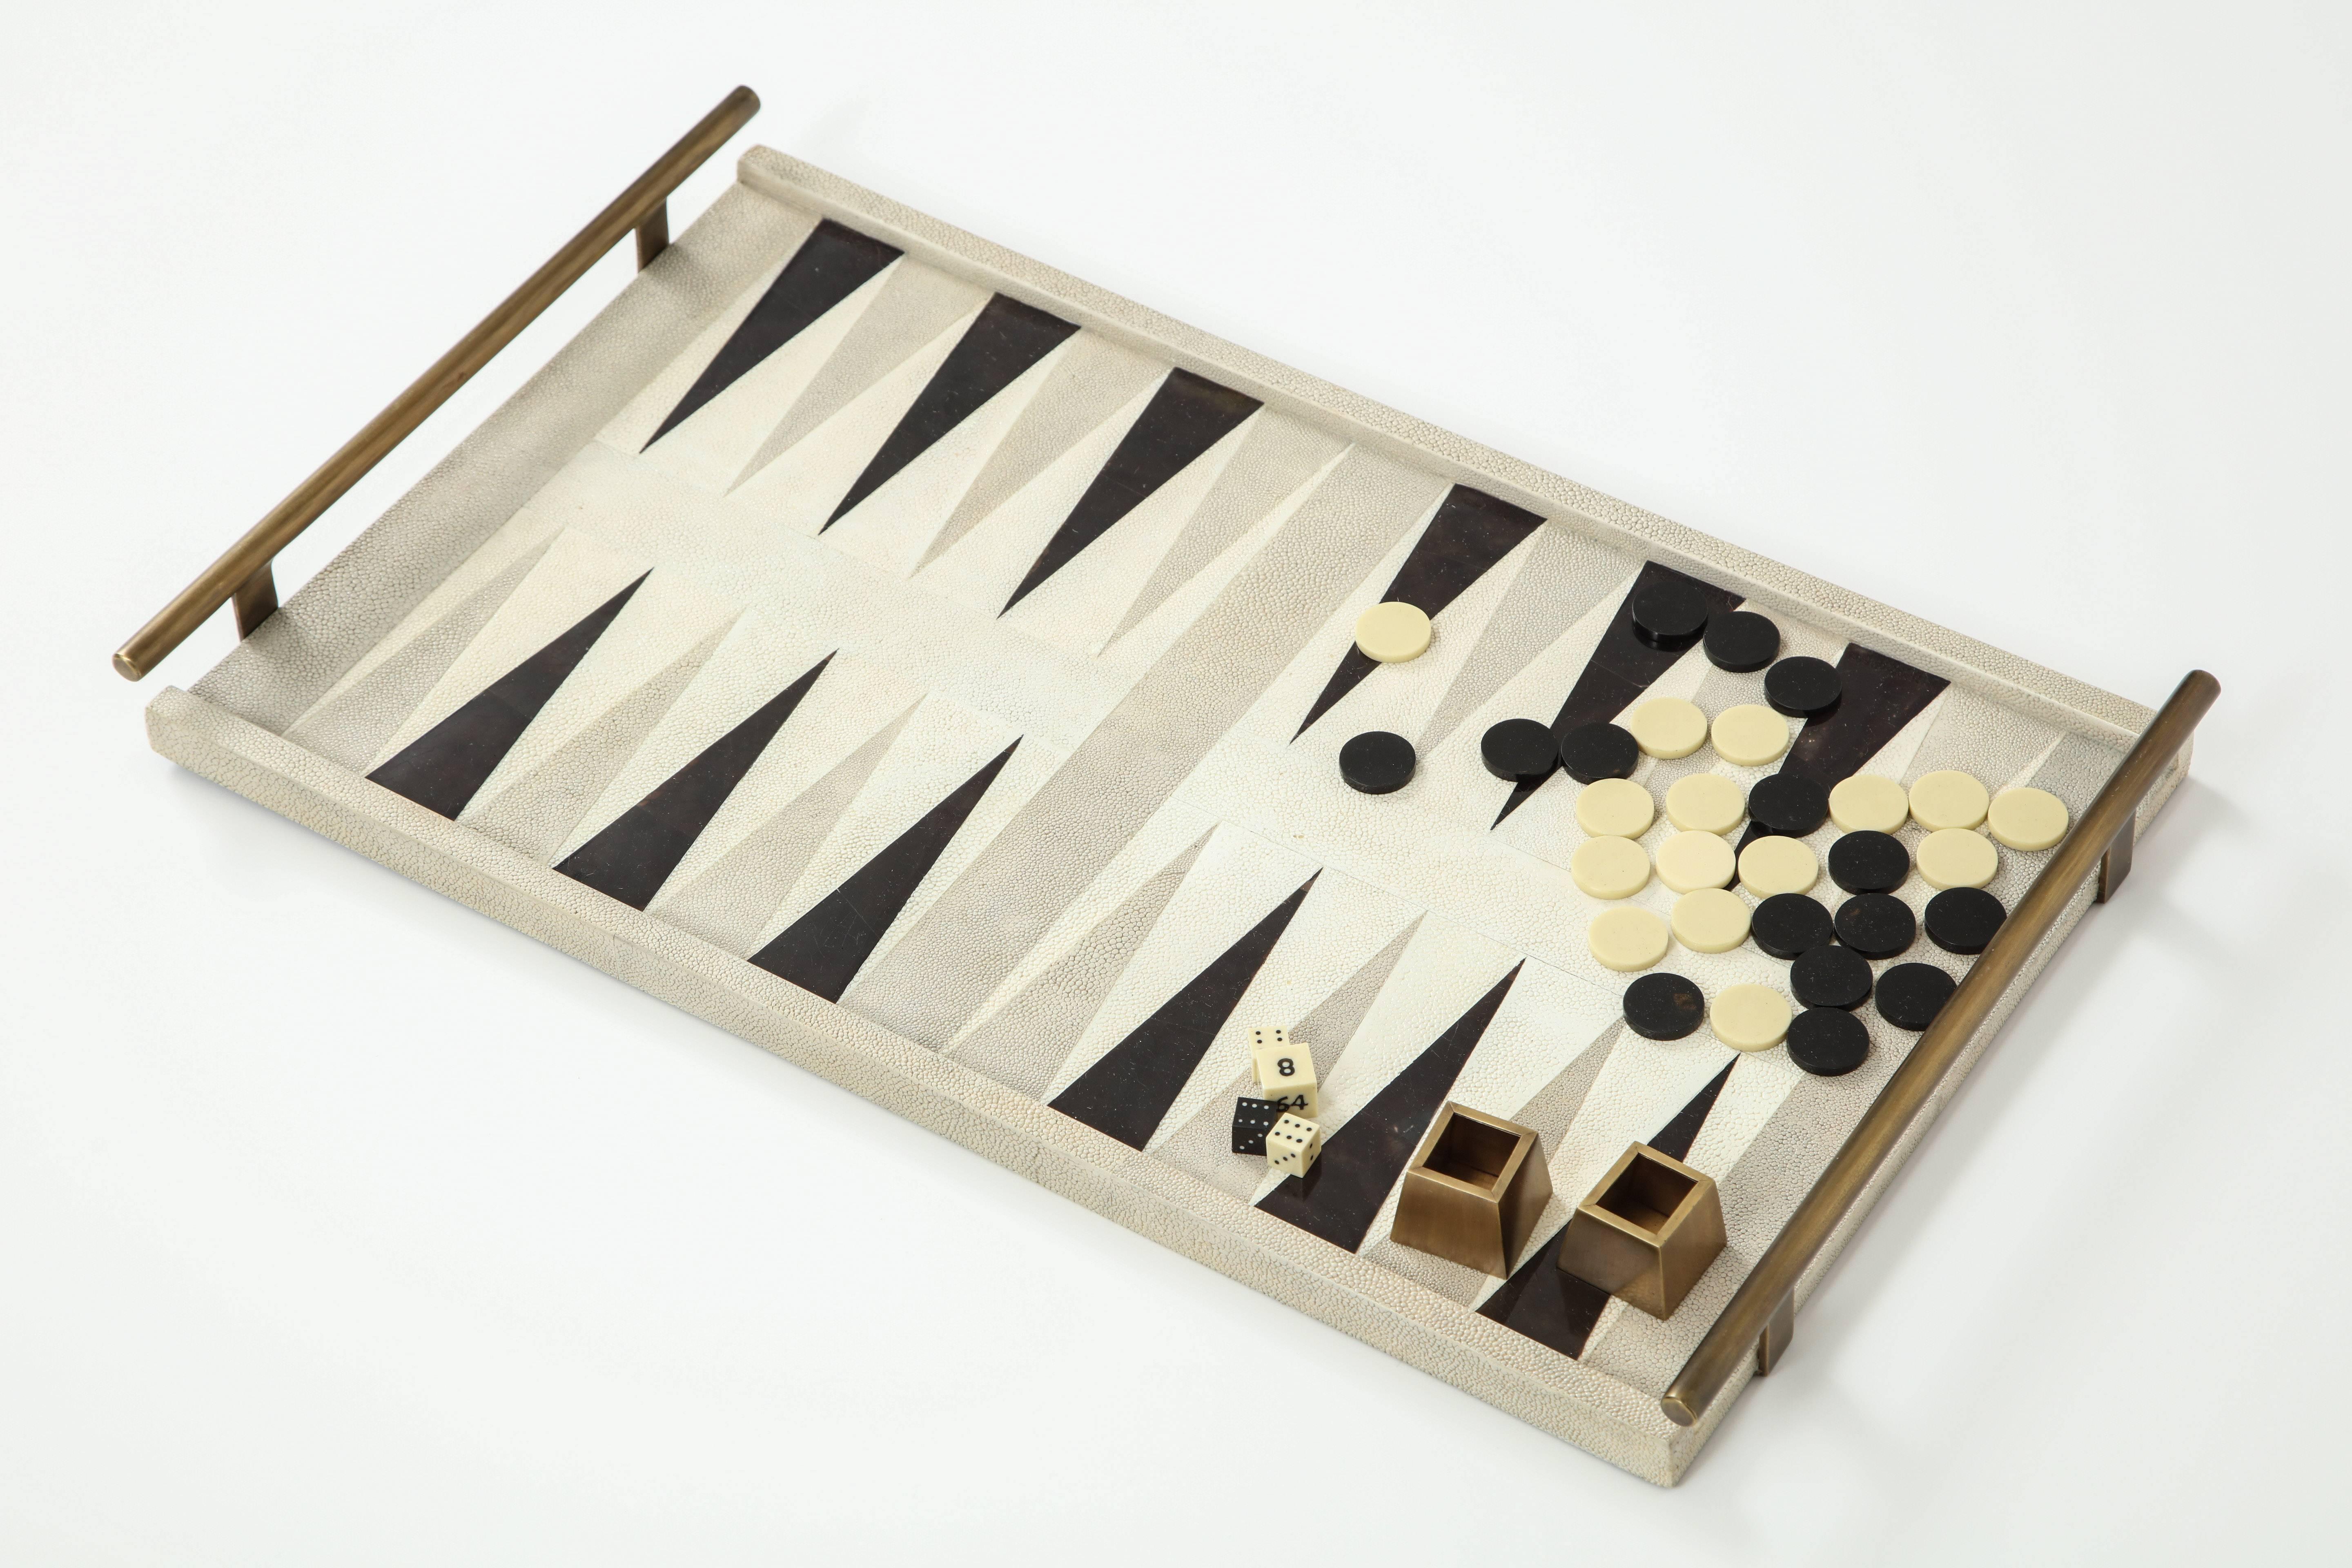 Backgammon board designed of grey shagreen, cream and black sea shell with bronze details. We have one in stock at our NYC showroom.